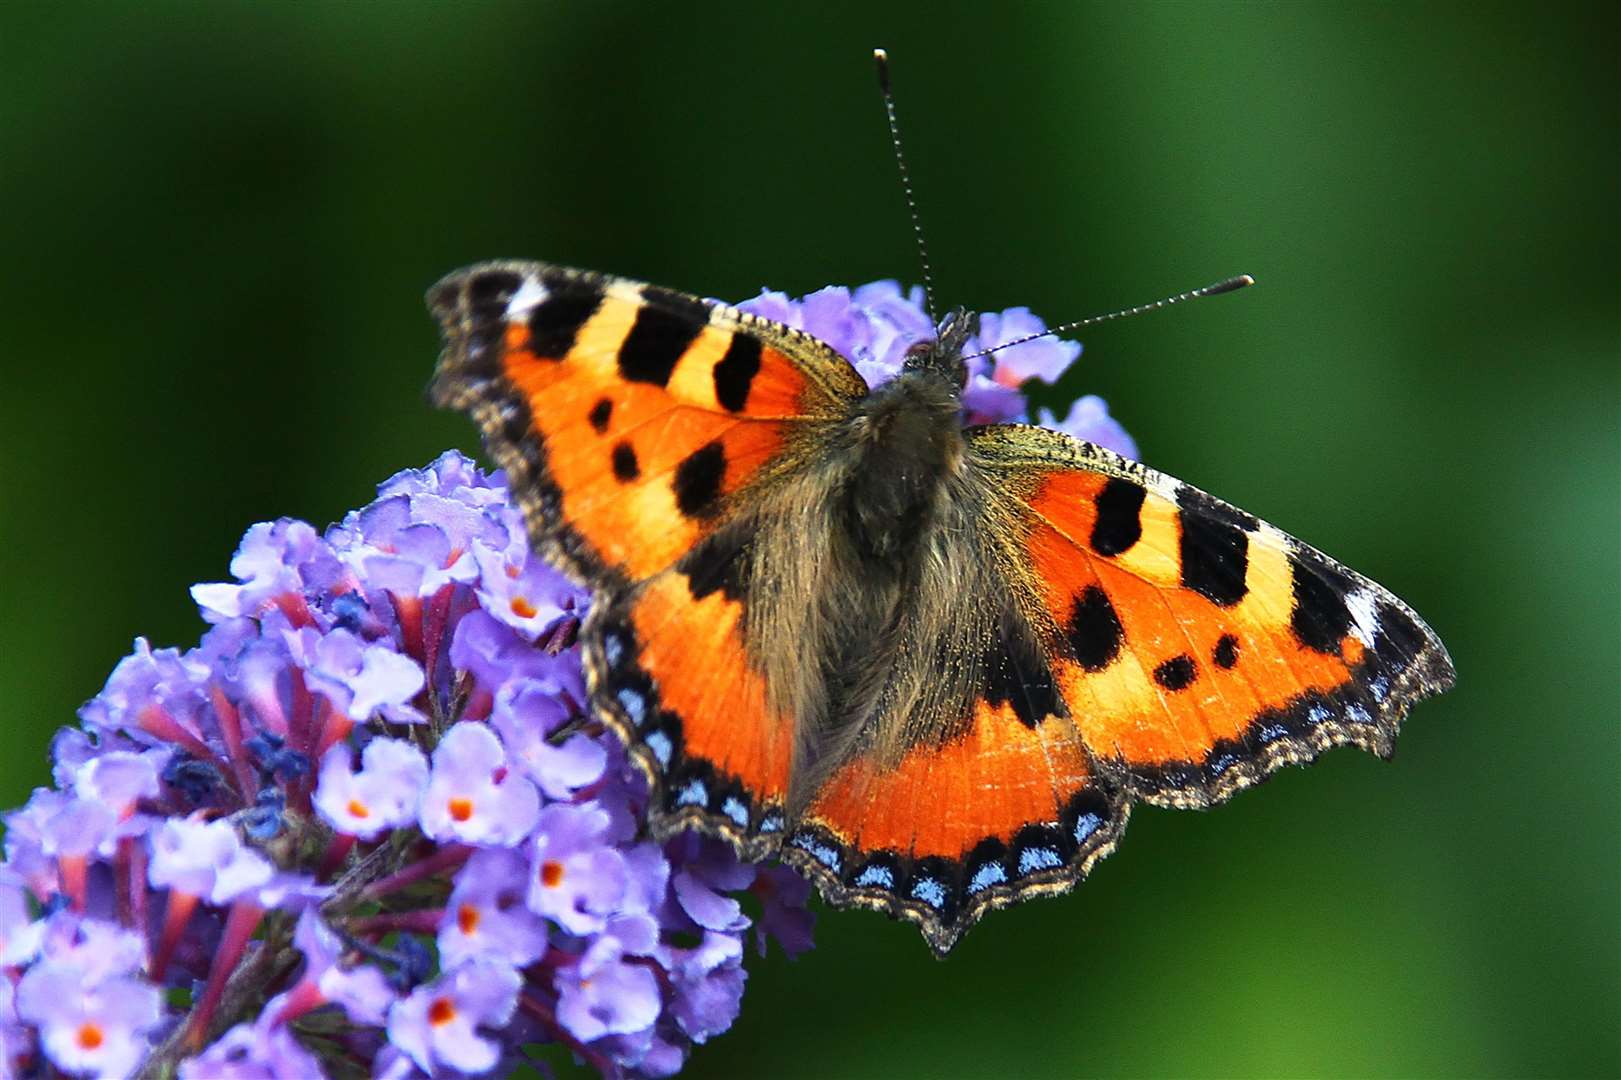 Plants use their scent to attract insects such as butterflies.